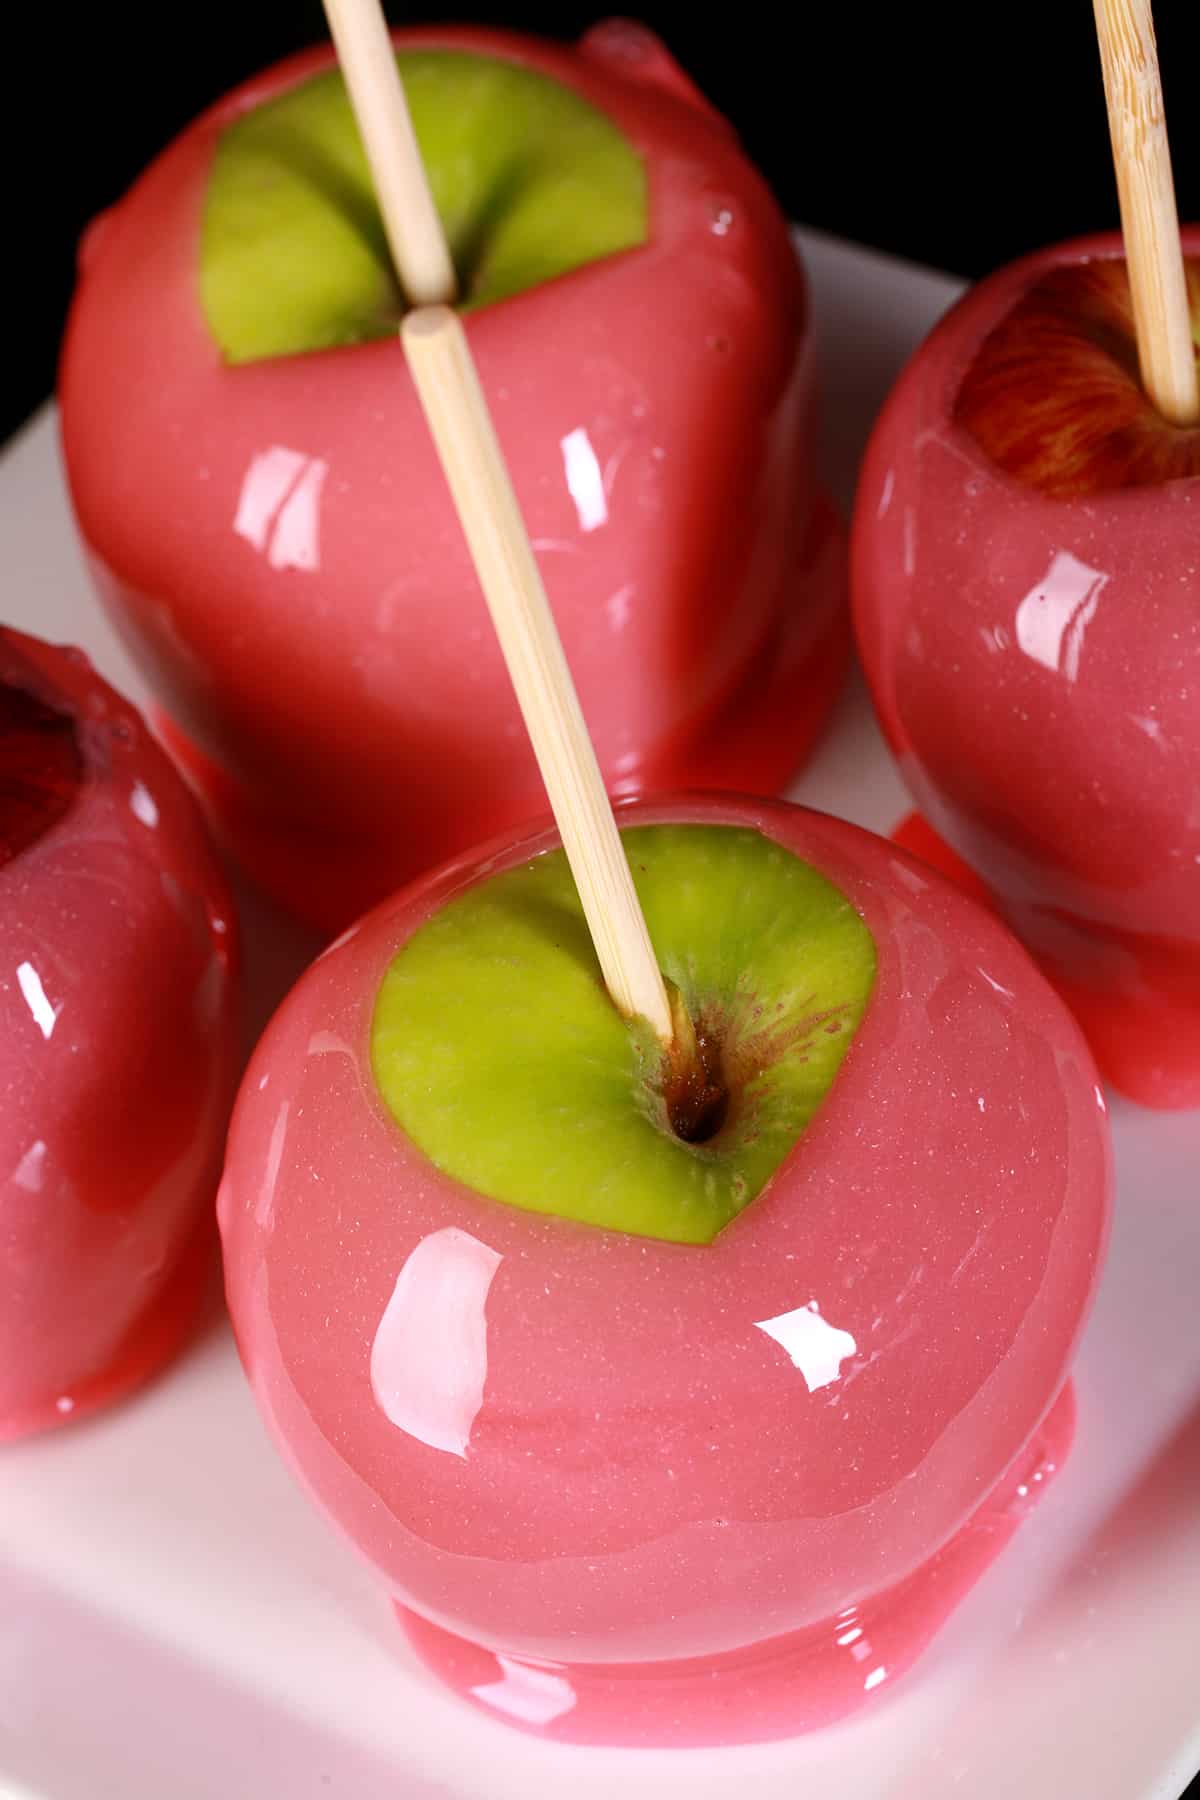 Several pink-coated candy apples on a plate. Half are red apples, the other half are green.